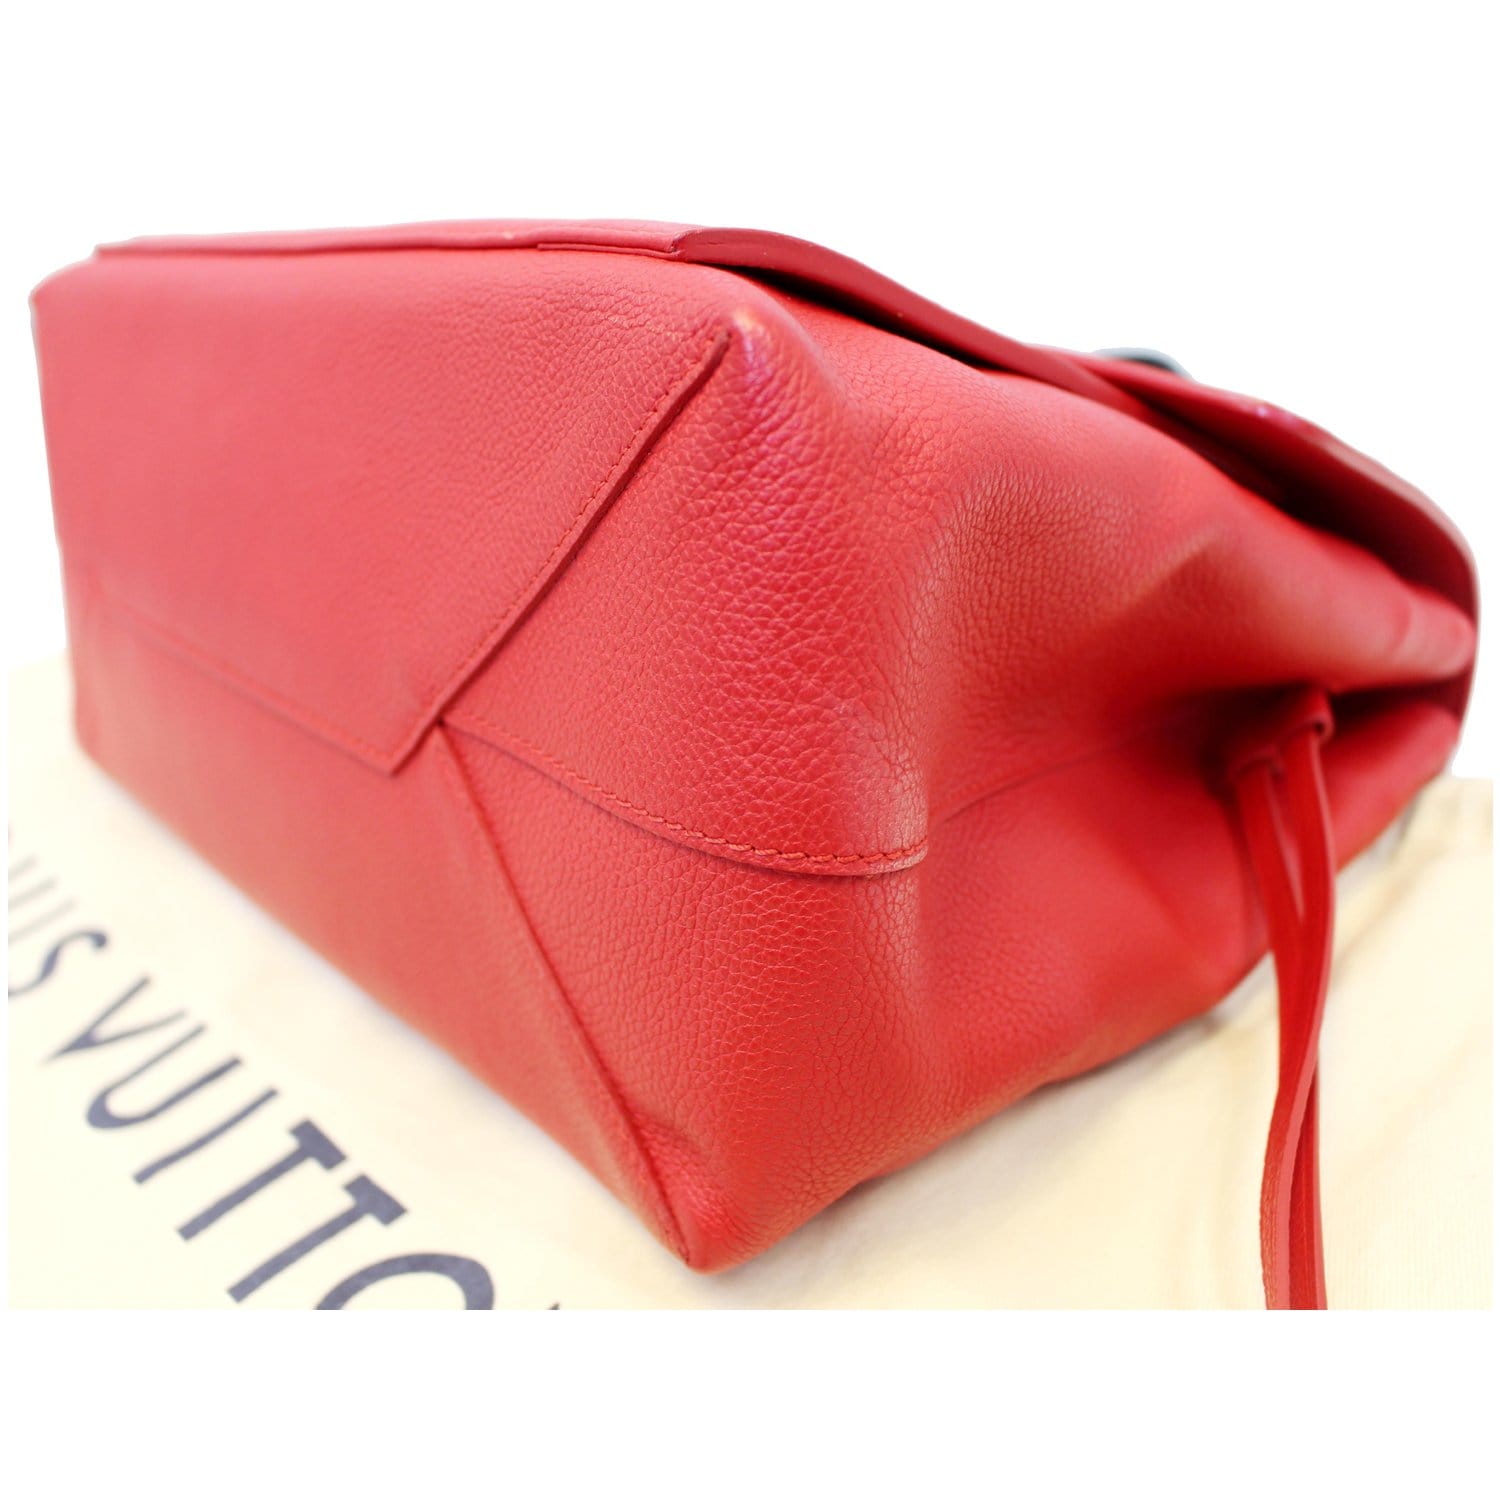 Louis Vuitton Marine/Rouge Leather Lockme PM Bag at 1stDibs